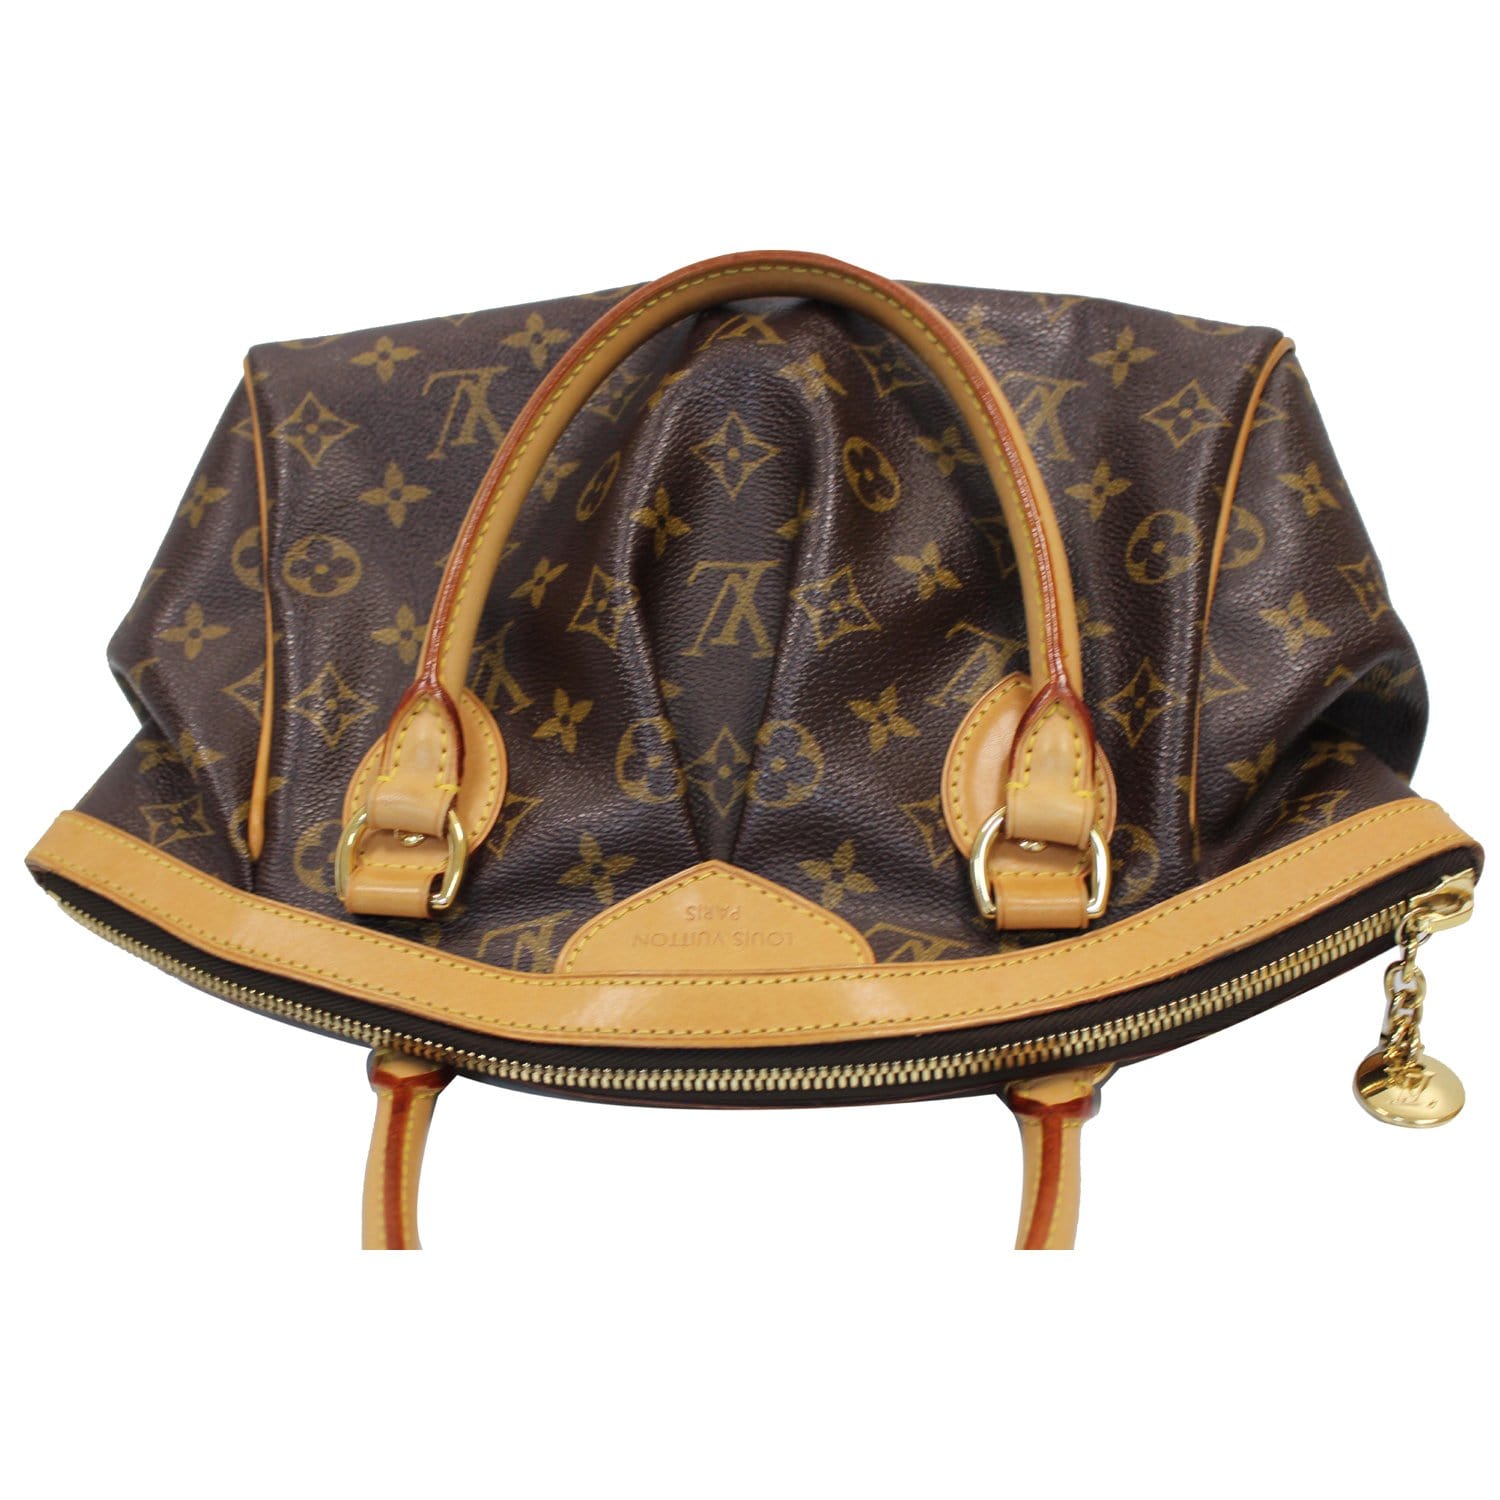 Select from our Louis Vuitton 2009 Monogram Canvas Tivoli PM Shoulder Bag  Louis Vuitton to get the look at the Lower Cost